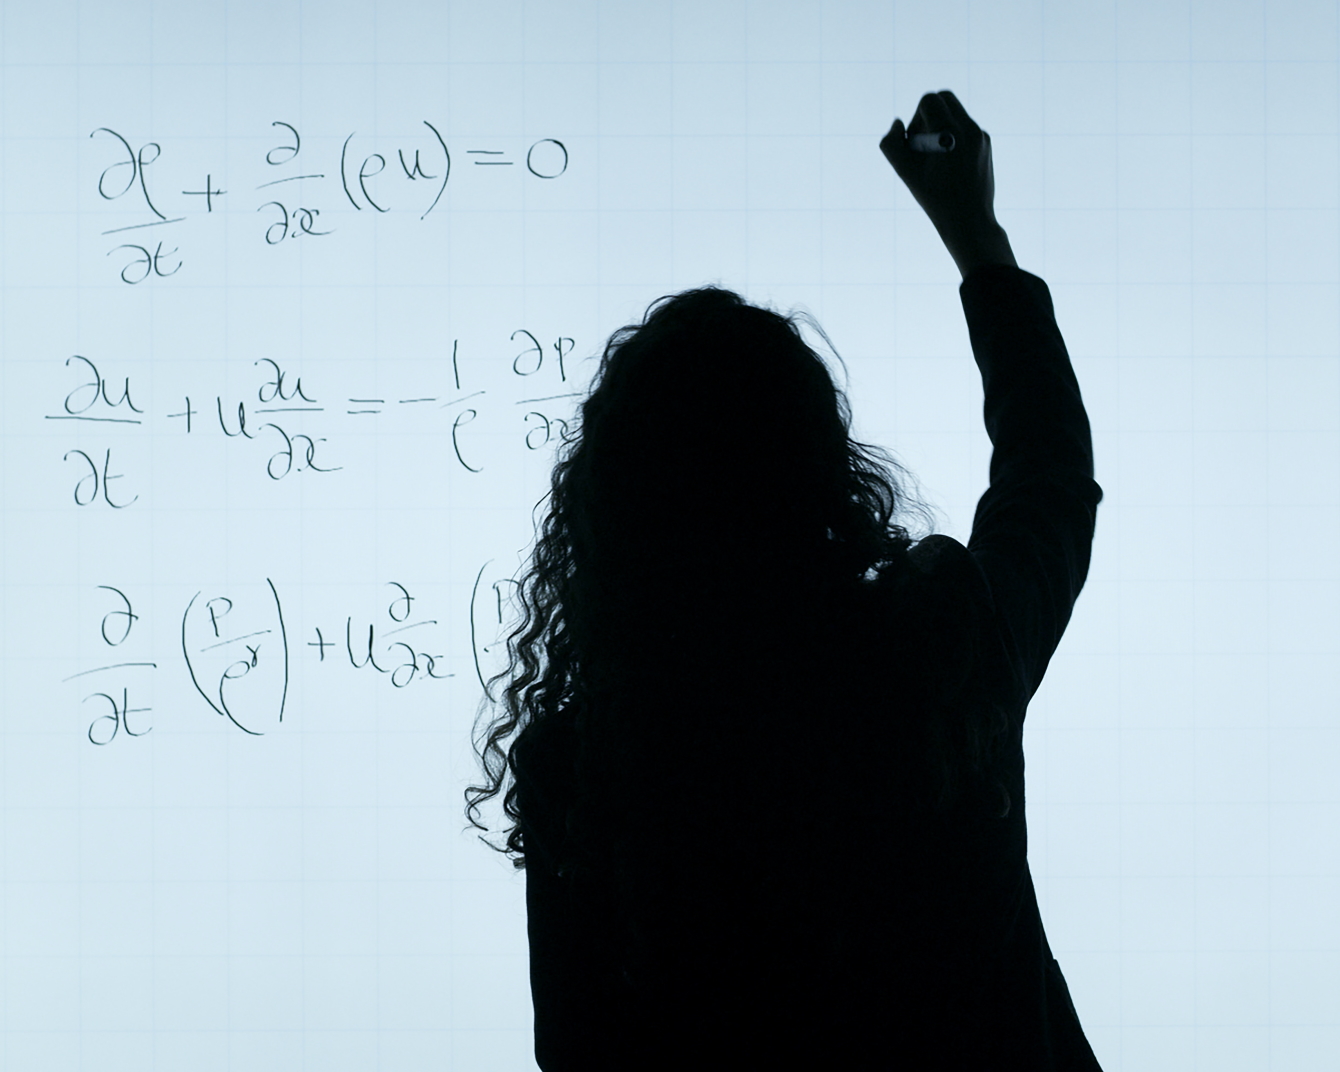 The image shows the silhouette of a woman with curly hair, illuminated against a whiteboard. She is writing an equation.